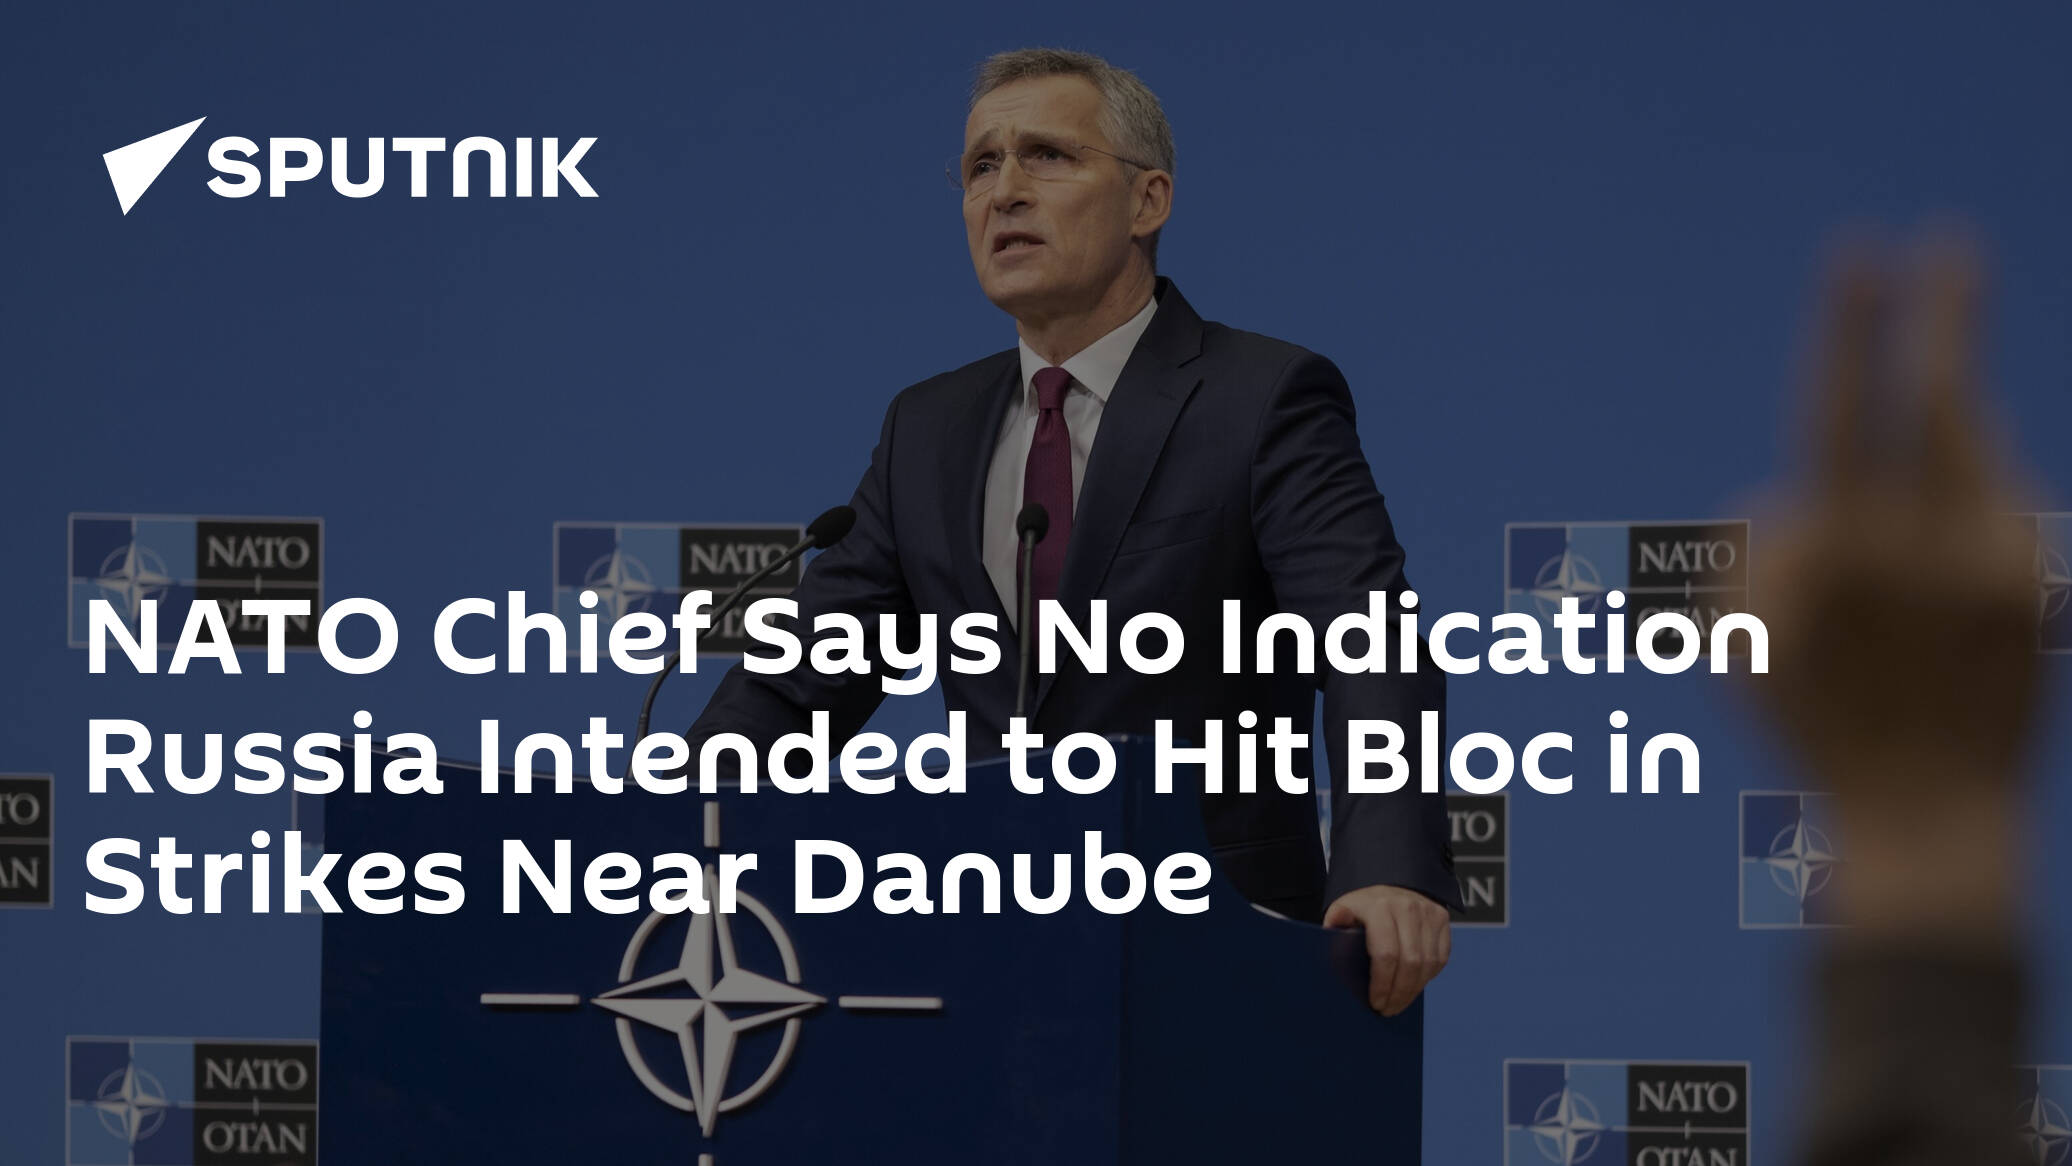 NATO Chief Says No Indication Russia Intended to Hit Bloc in Strikes Near Danube